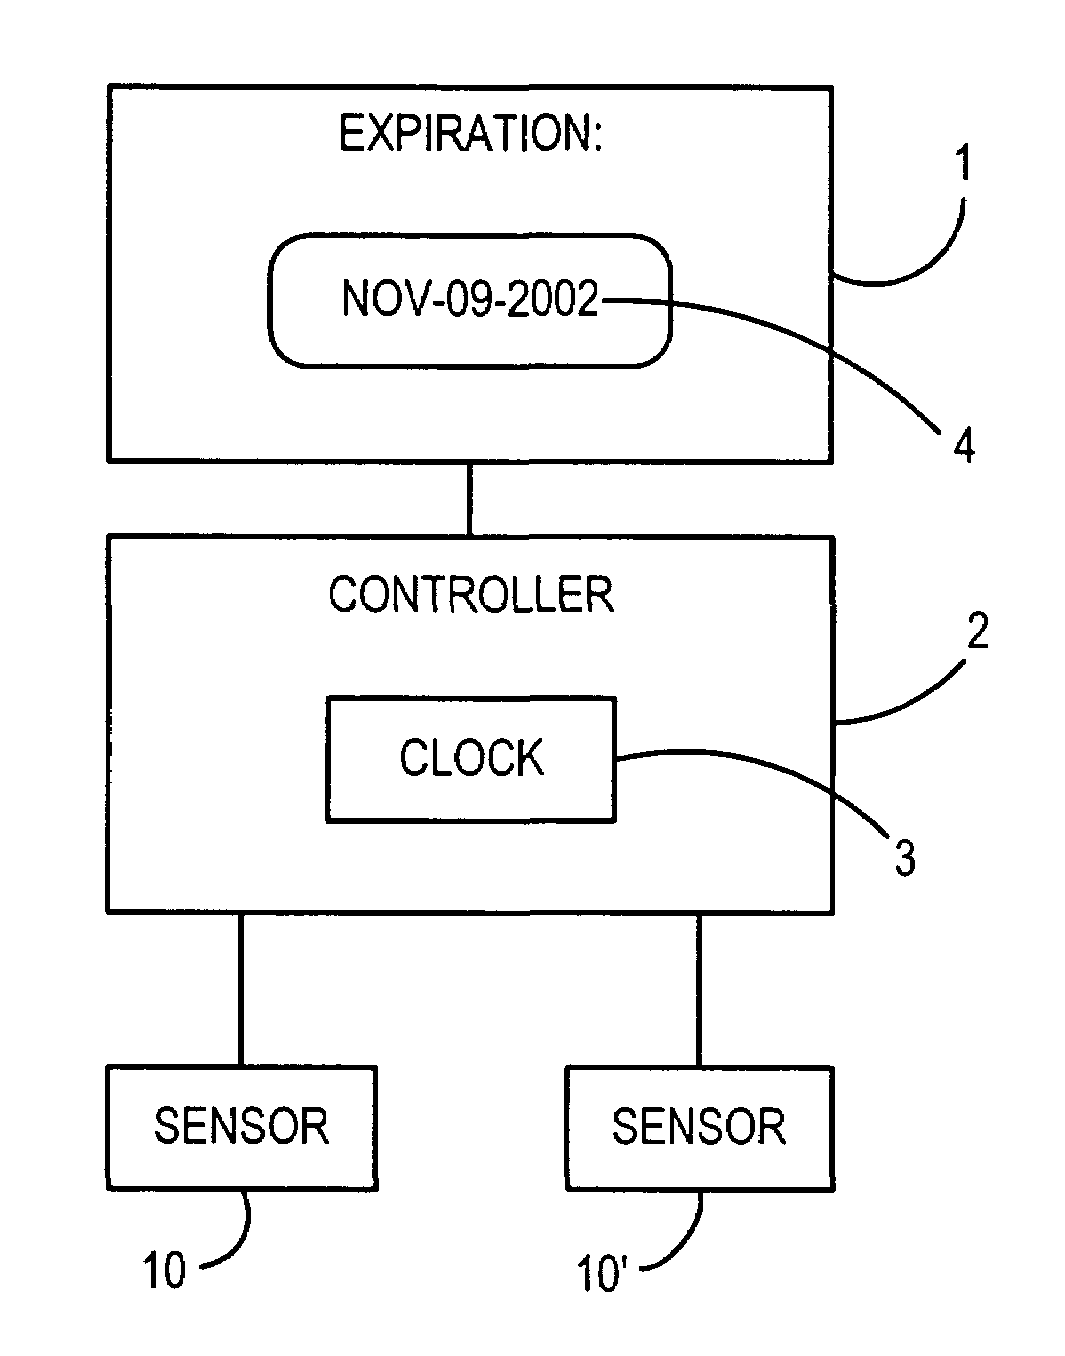 Method for displaying an environmentally modulated expiration date